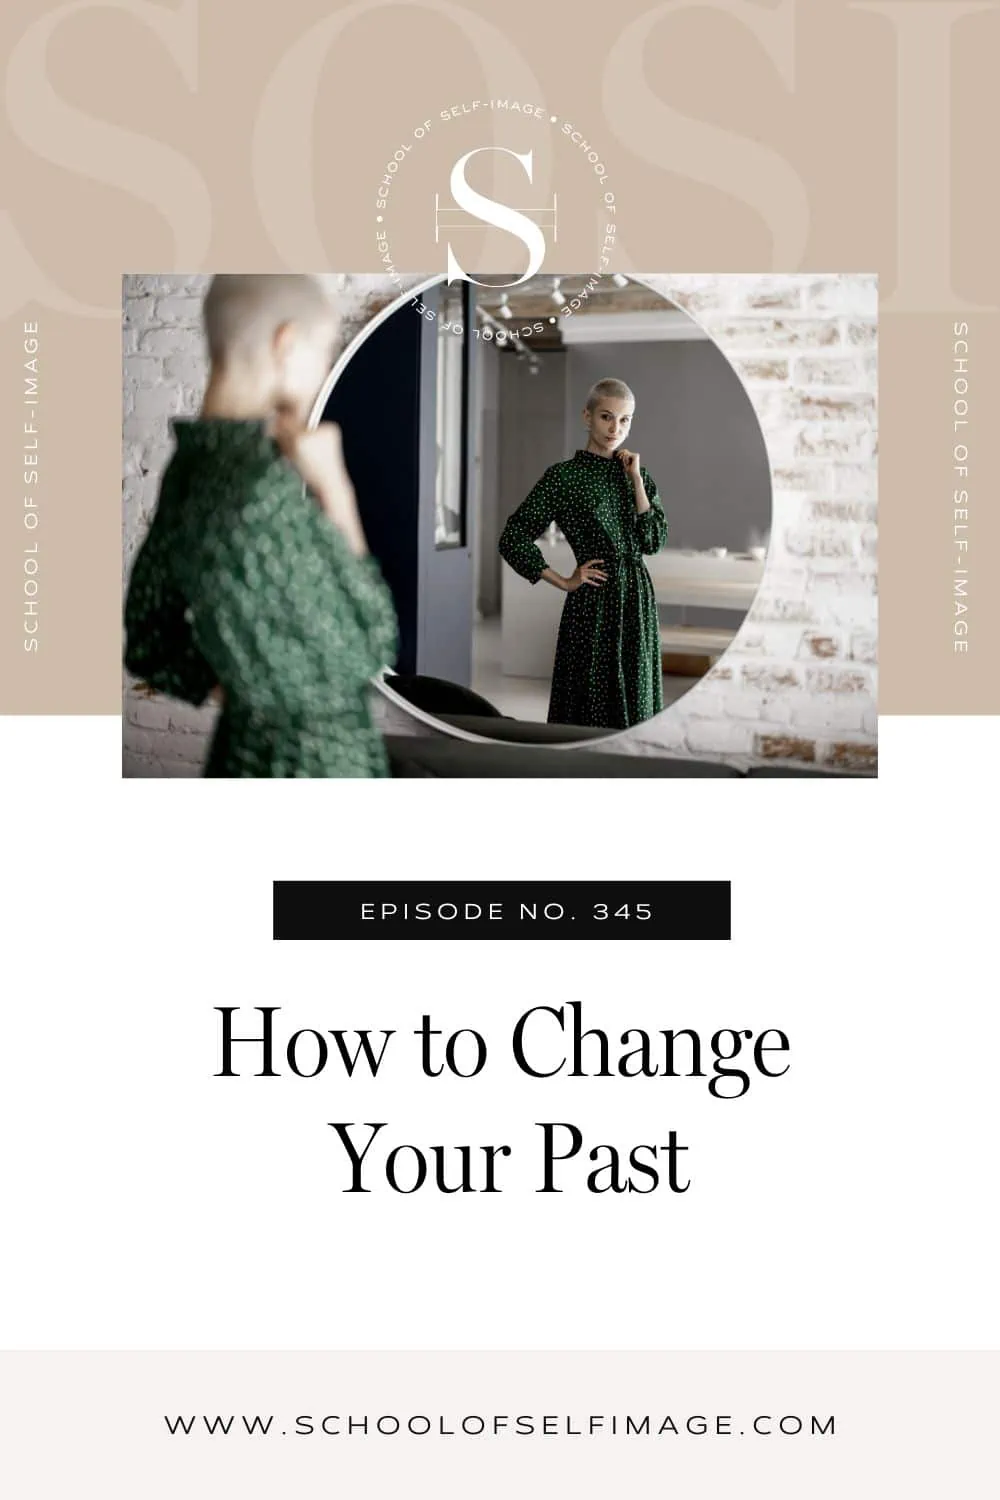 How to Change your Past